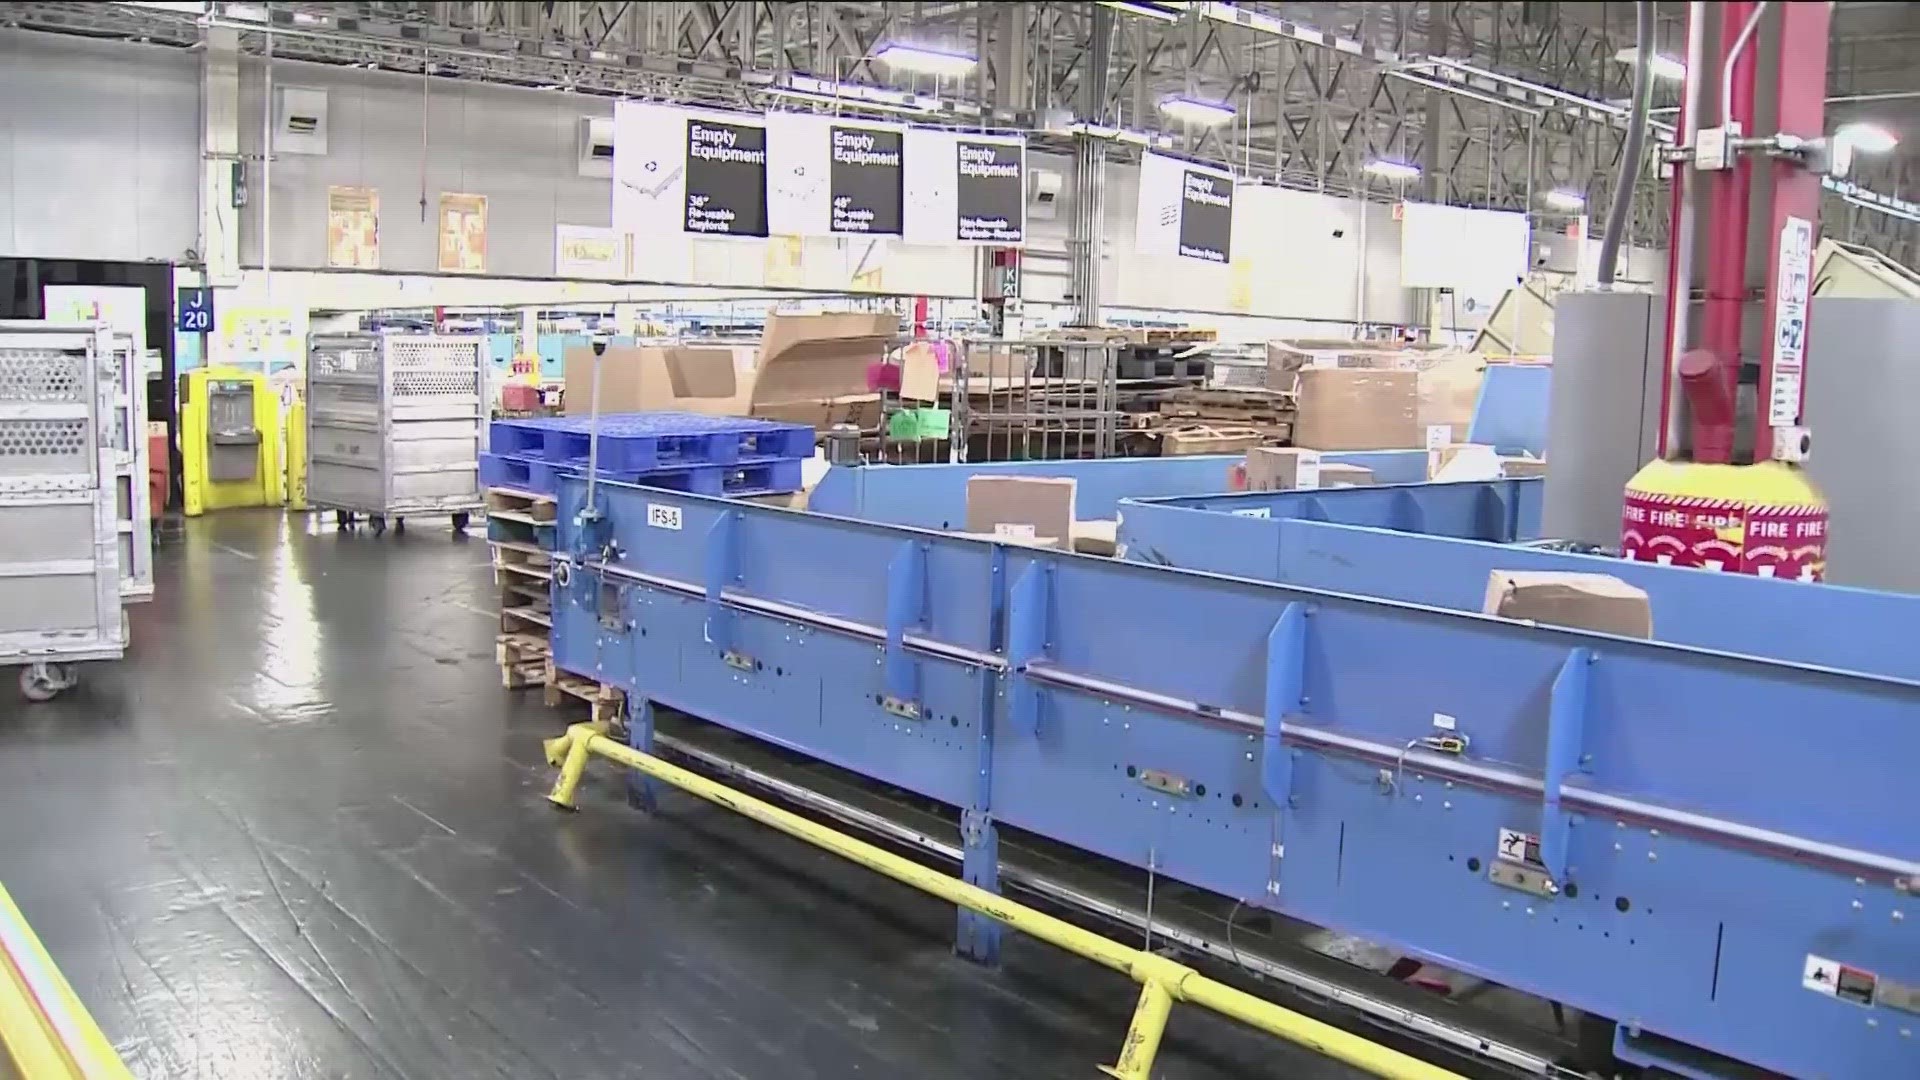 USPS considers moving some mail processing operations out of Fayetteville -  Fayetteville Flyer